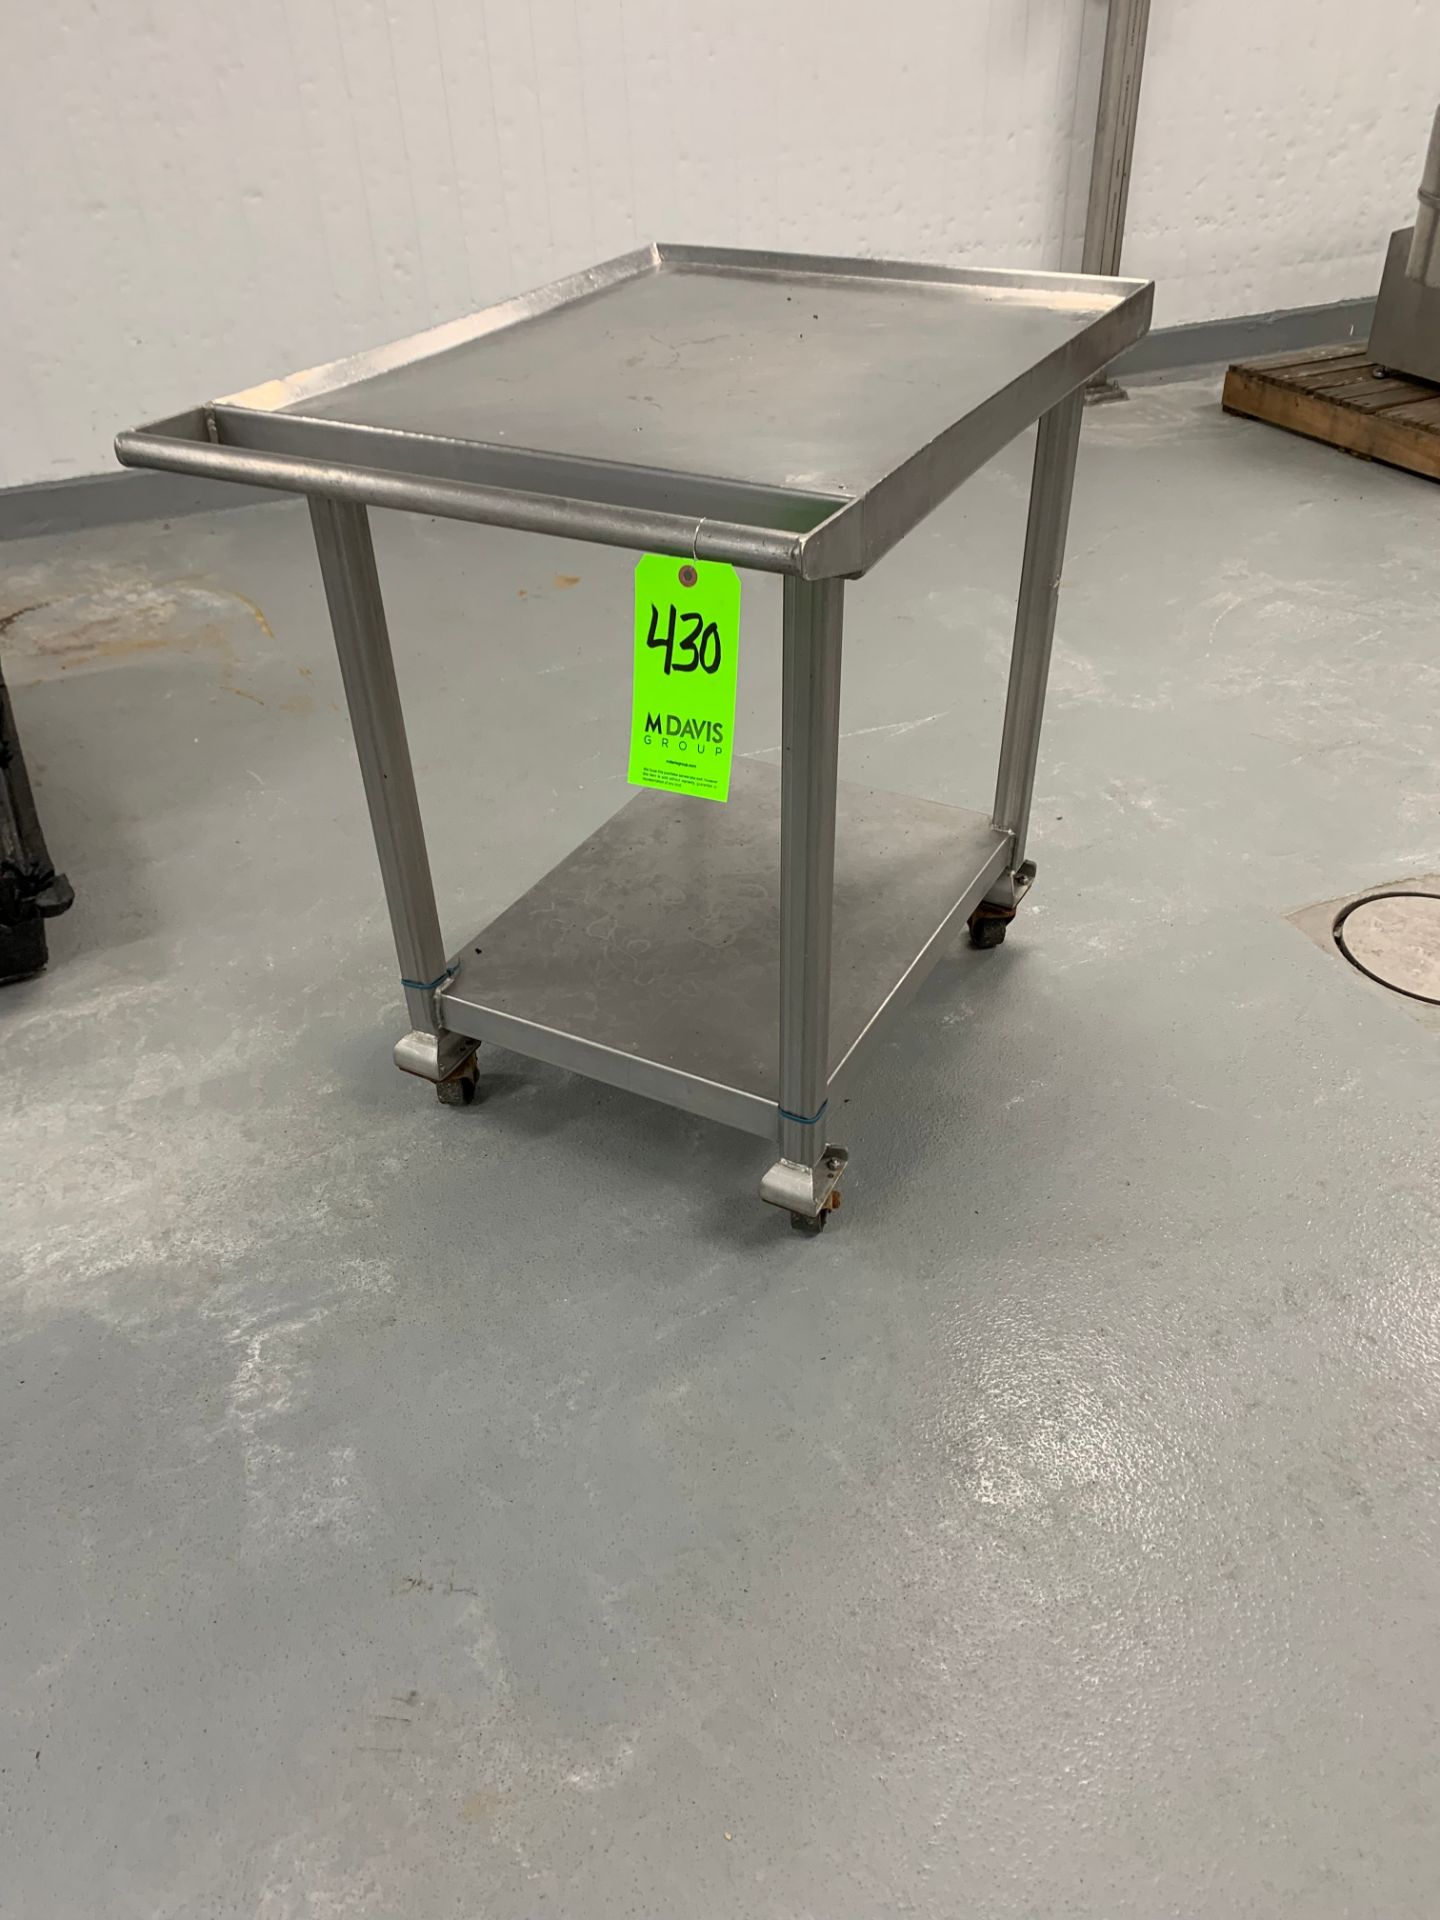 S/S PUSH CART, APPROX. 29-1/2 IN X 24 IN X 33 IN LWH